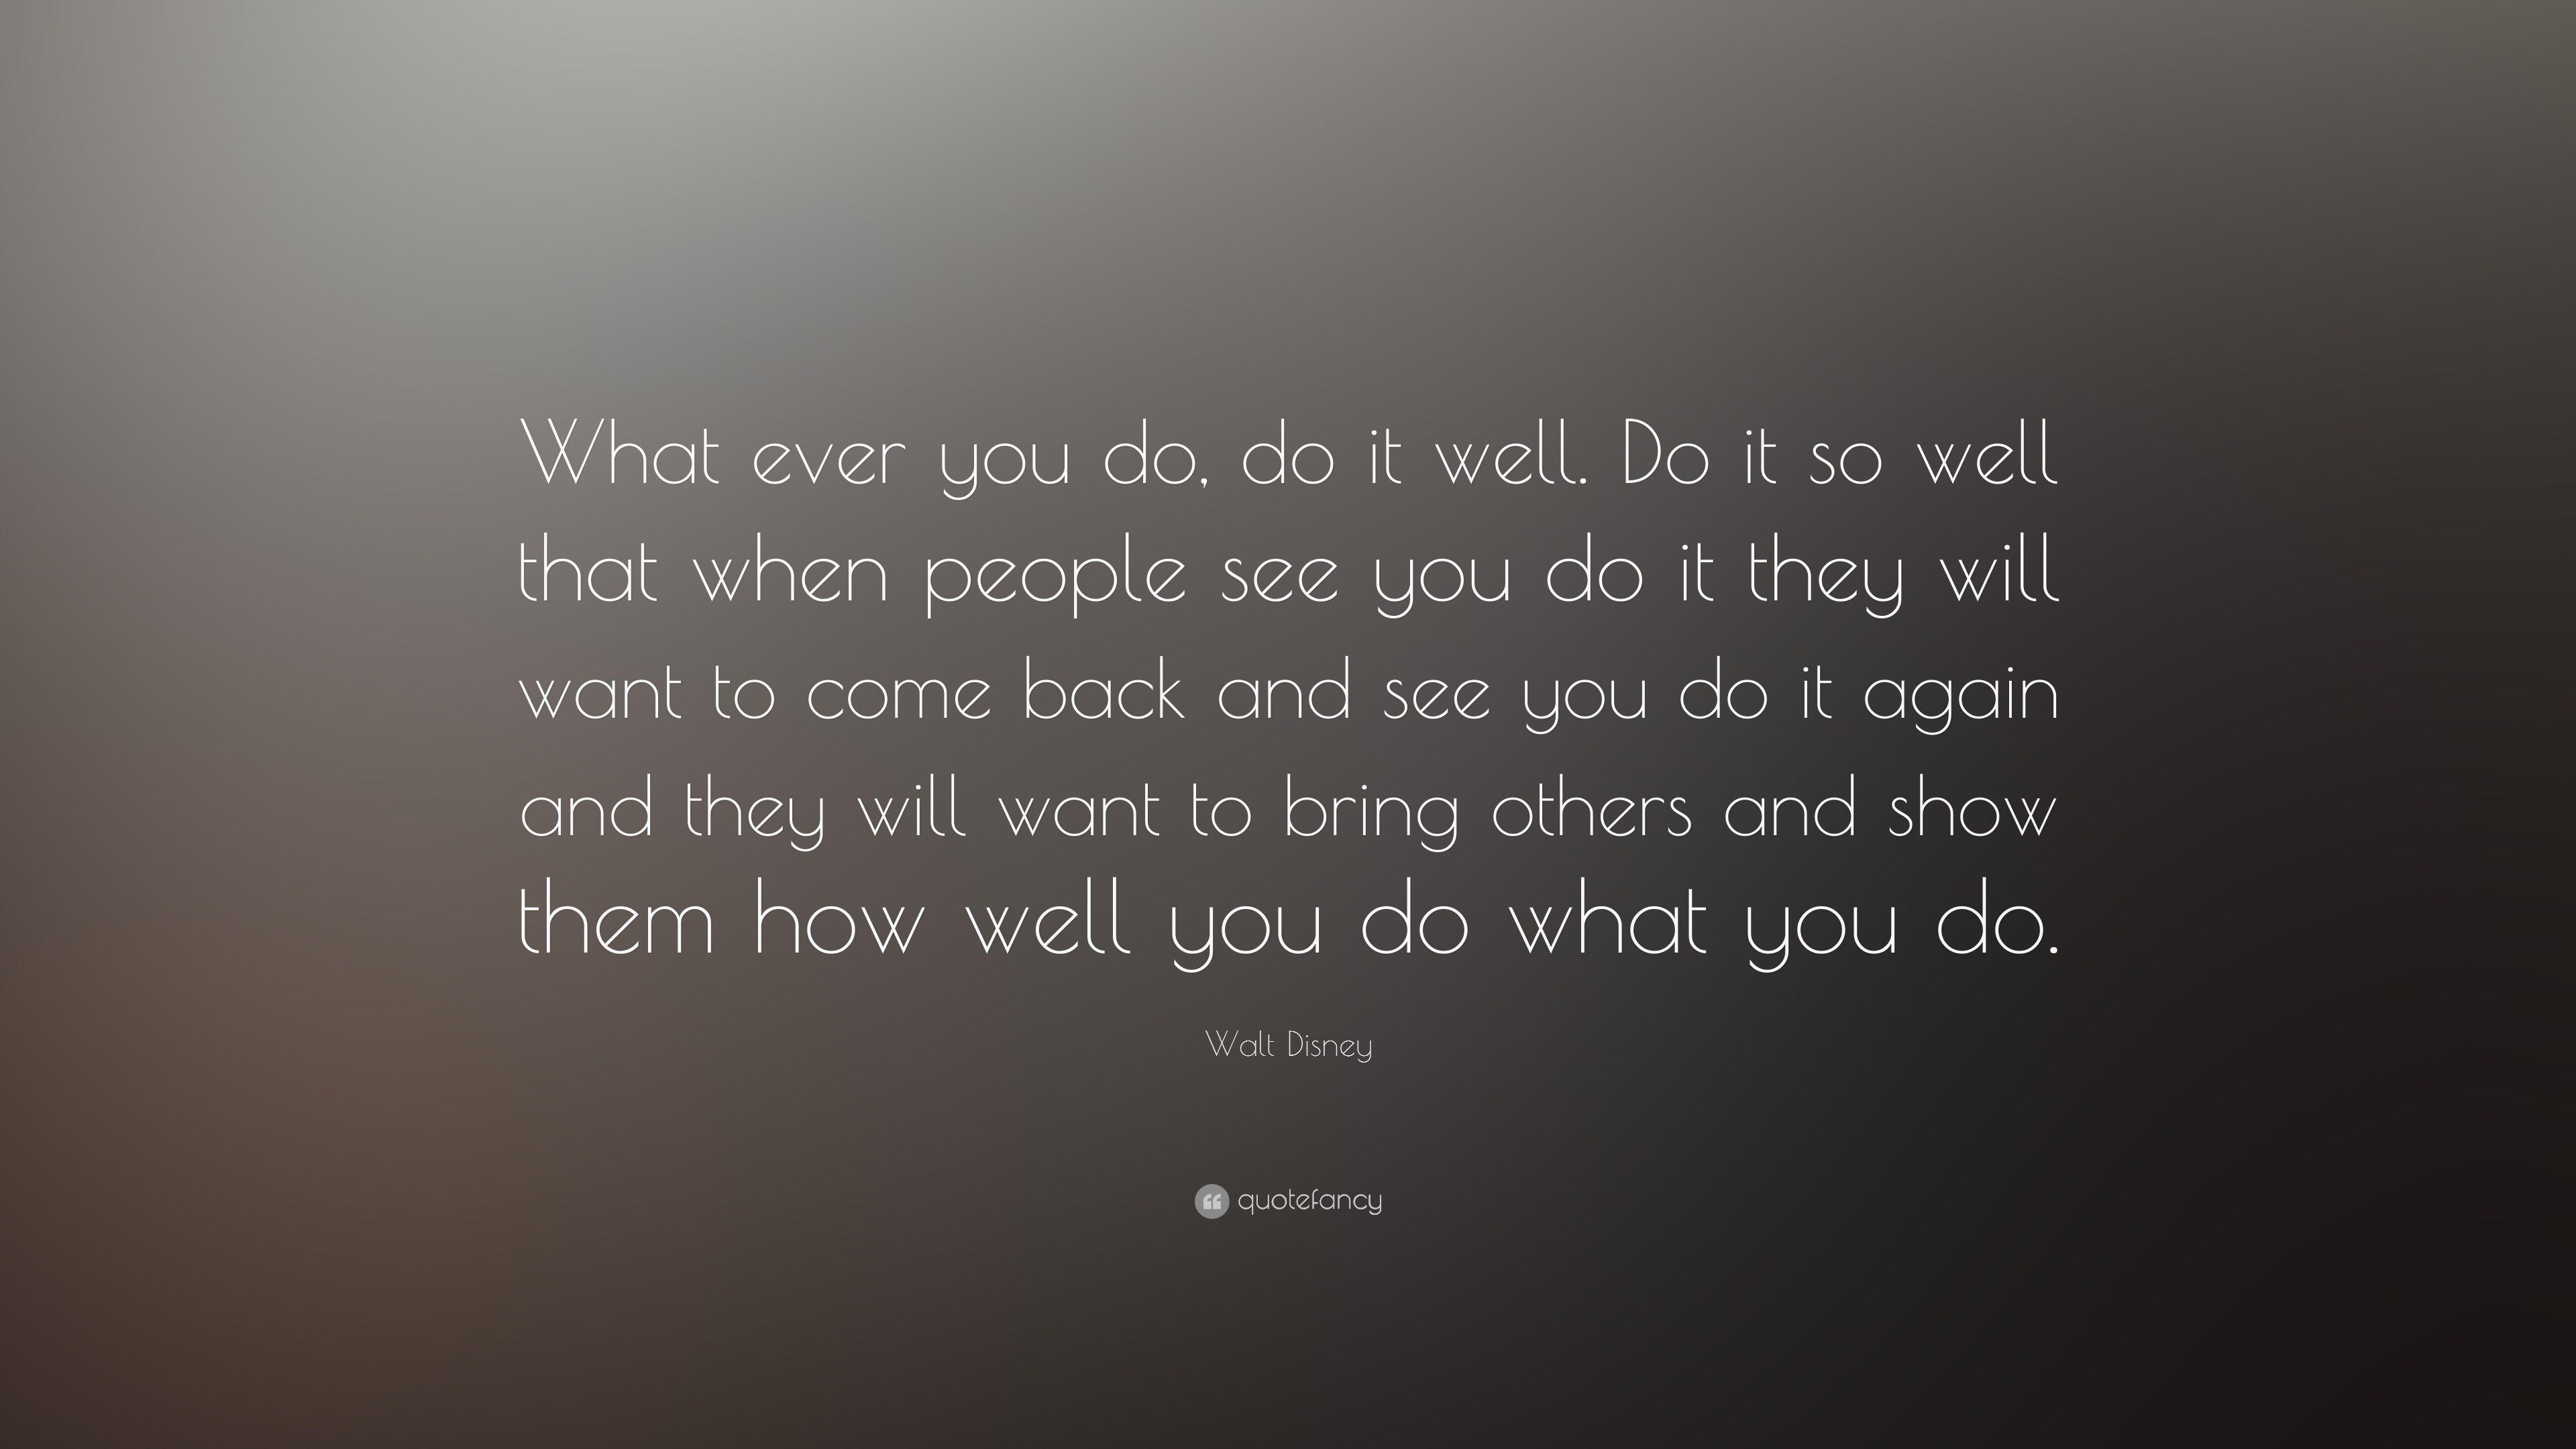 Walt Disney Quote: “What ever you do, do it well. Do it so well